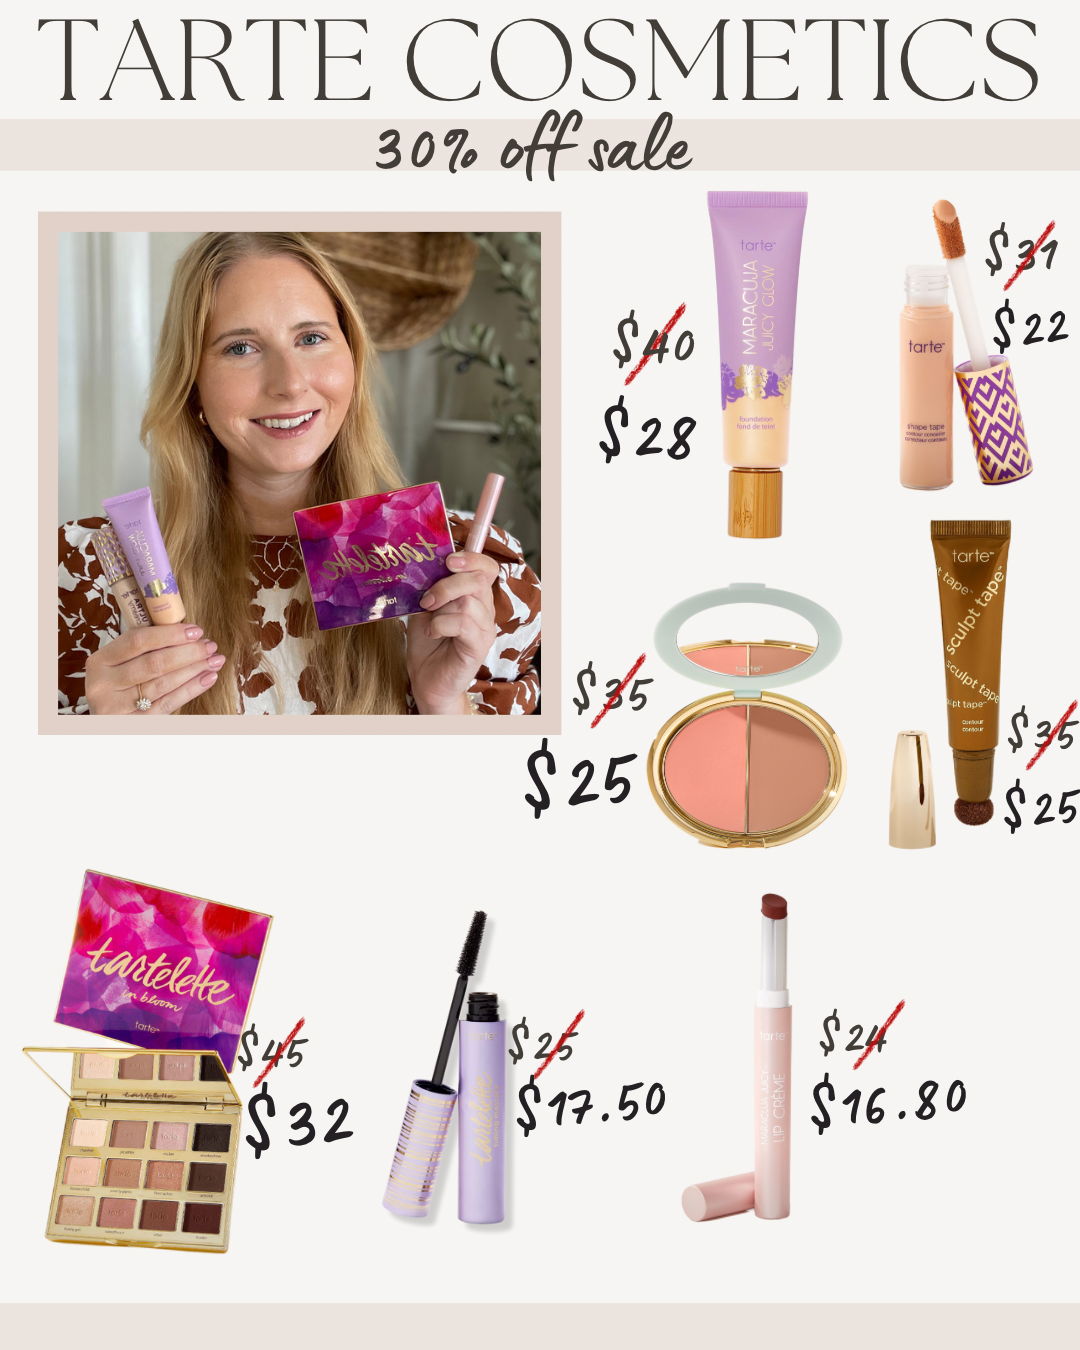 Tarte Cosmetics Makeup Routine - Affordable by Amanda